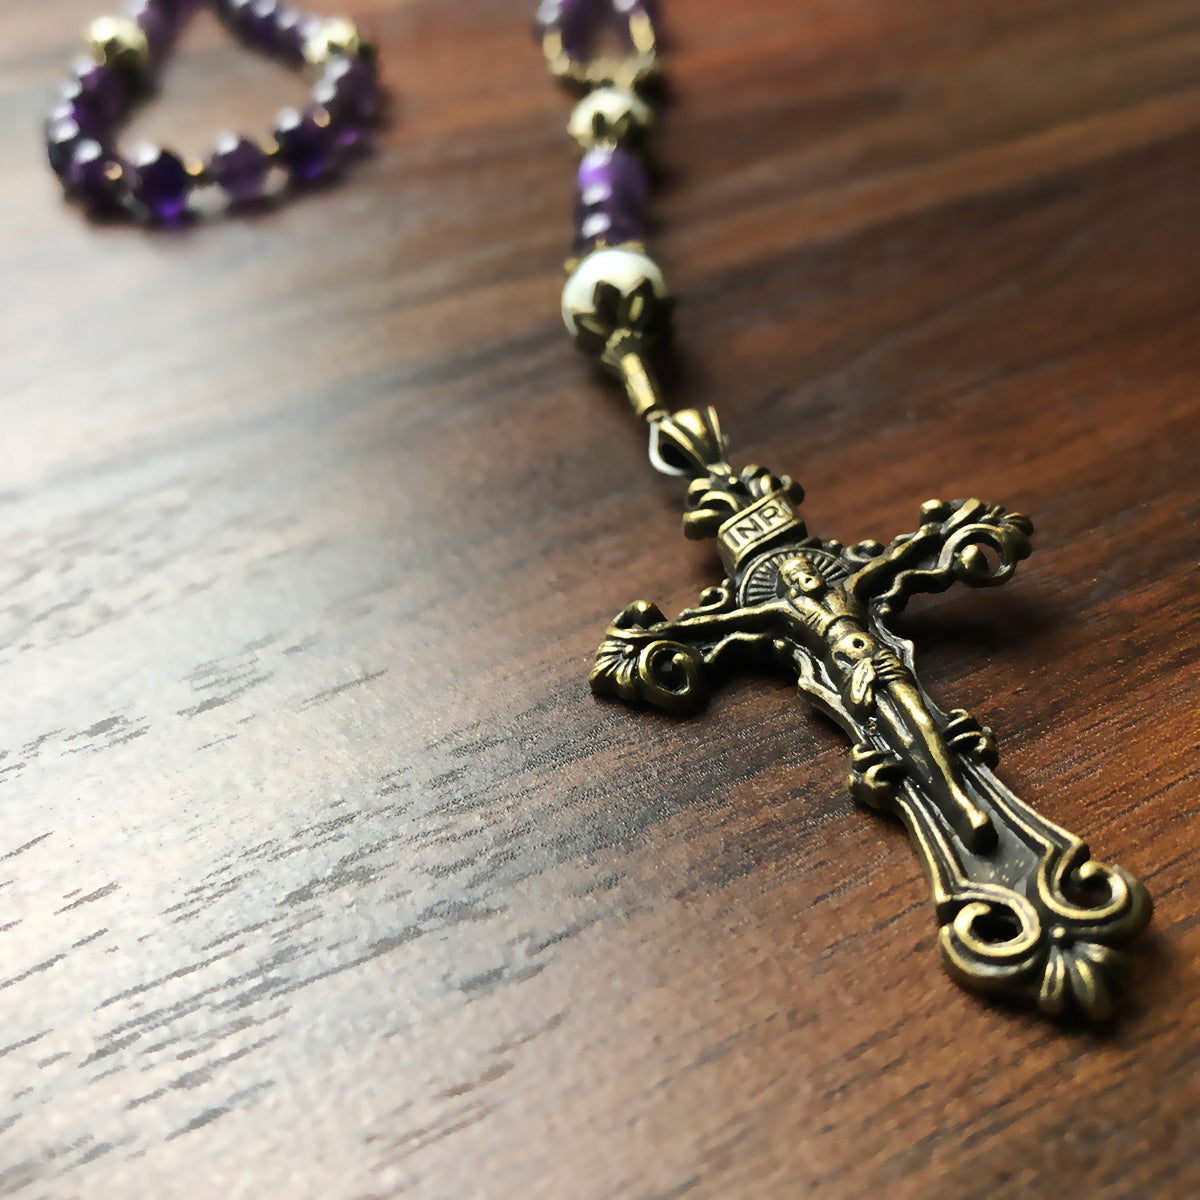 Amethyst and Mother of Pearl Stone Rosary With Miraculous Medal by Catholic Heirlooms - Confirmation - Holy Communion Gift - Rosary Necklace